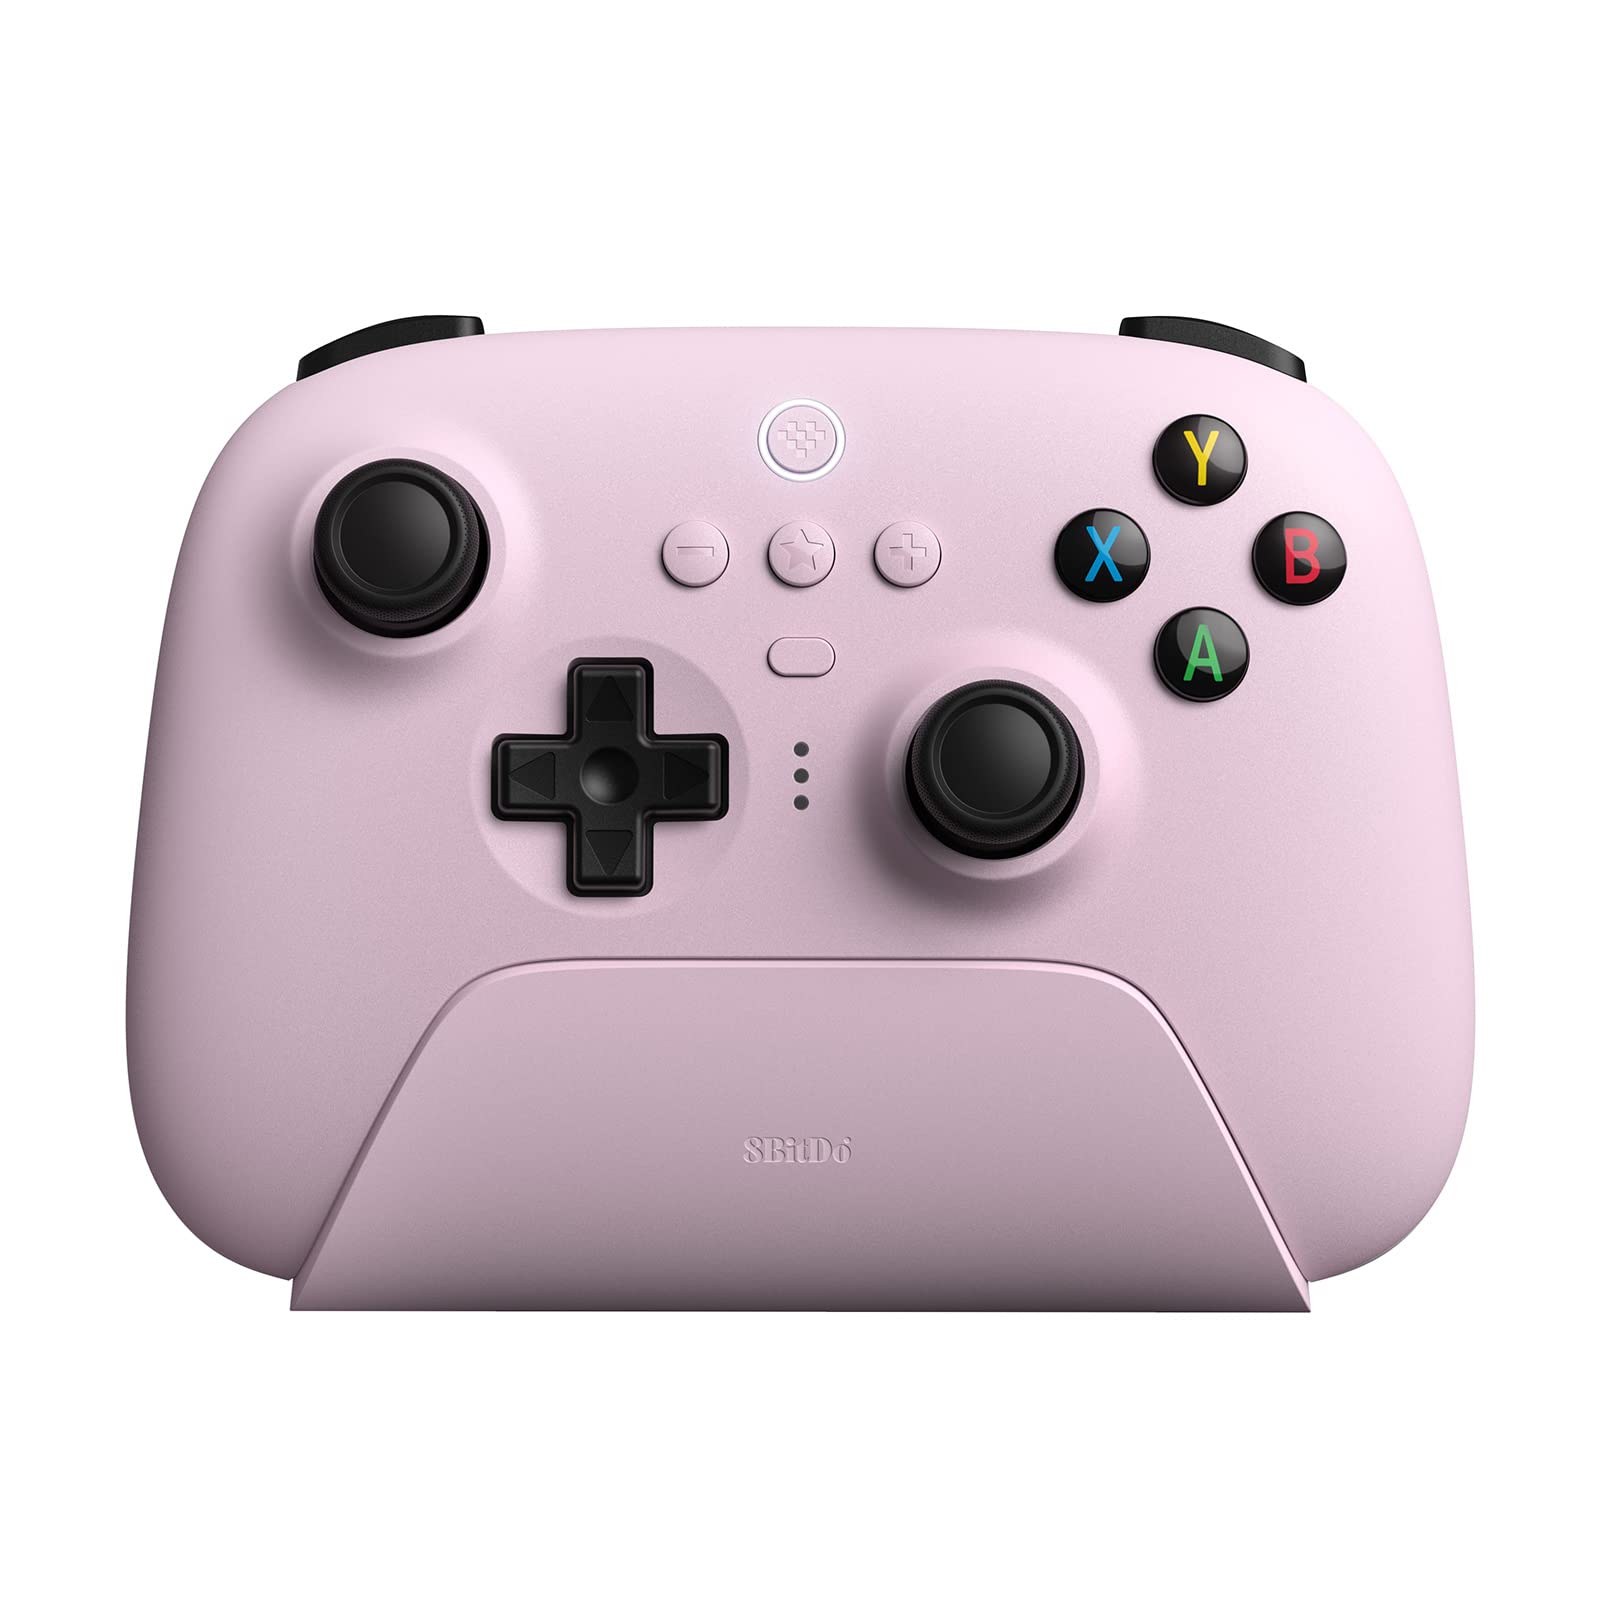 8BitDo Ultimate 2.4g Wireless Controller w/ Charging Dock (Mobile & PC, Pastel Pink) $37.20 + Free Shipping